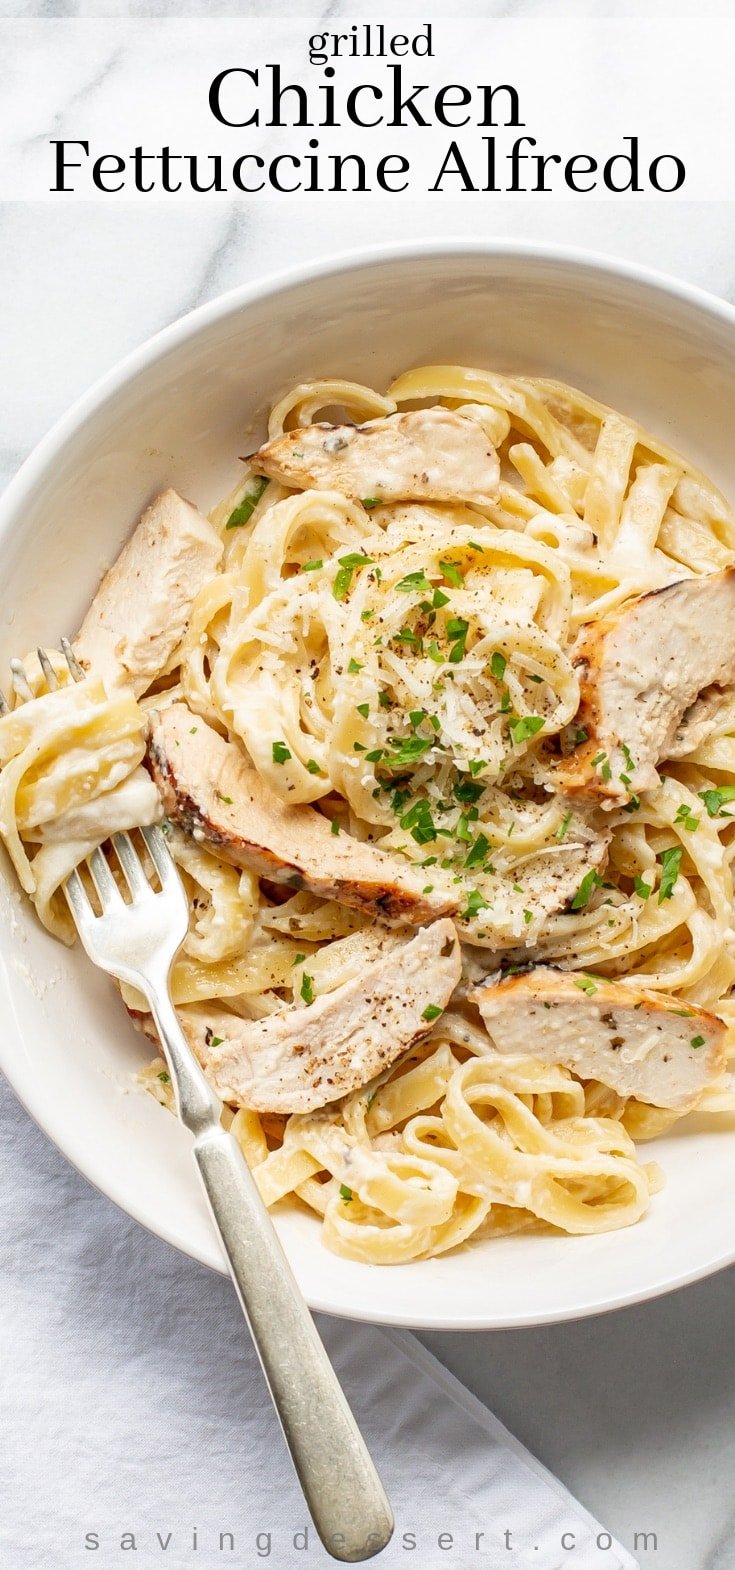 A bowl of grilled chicken fettuccine Alfredo with parsley and grated Parmesan cheese